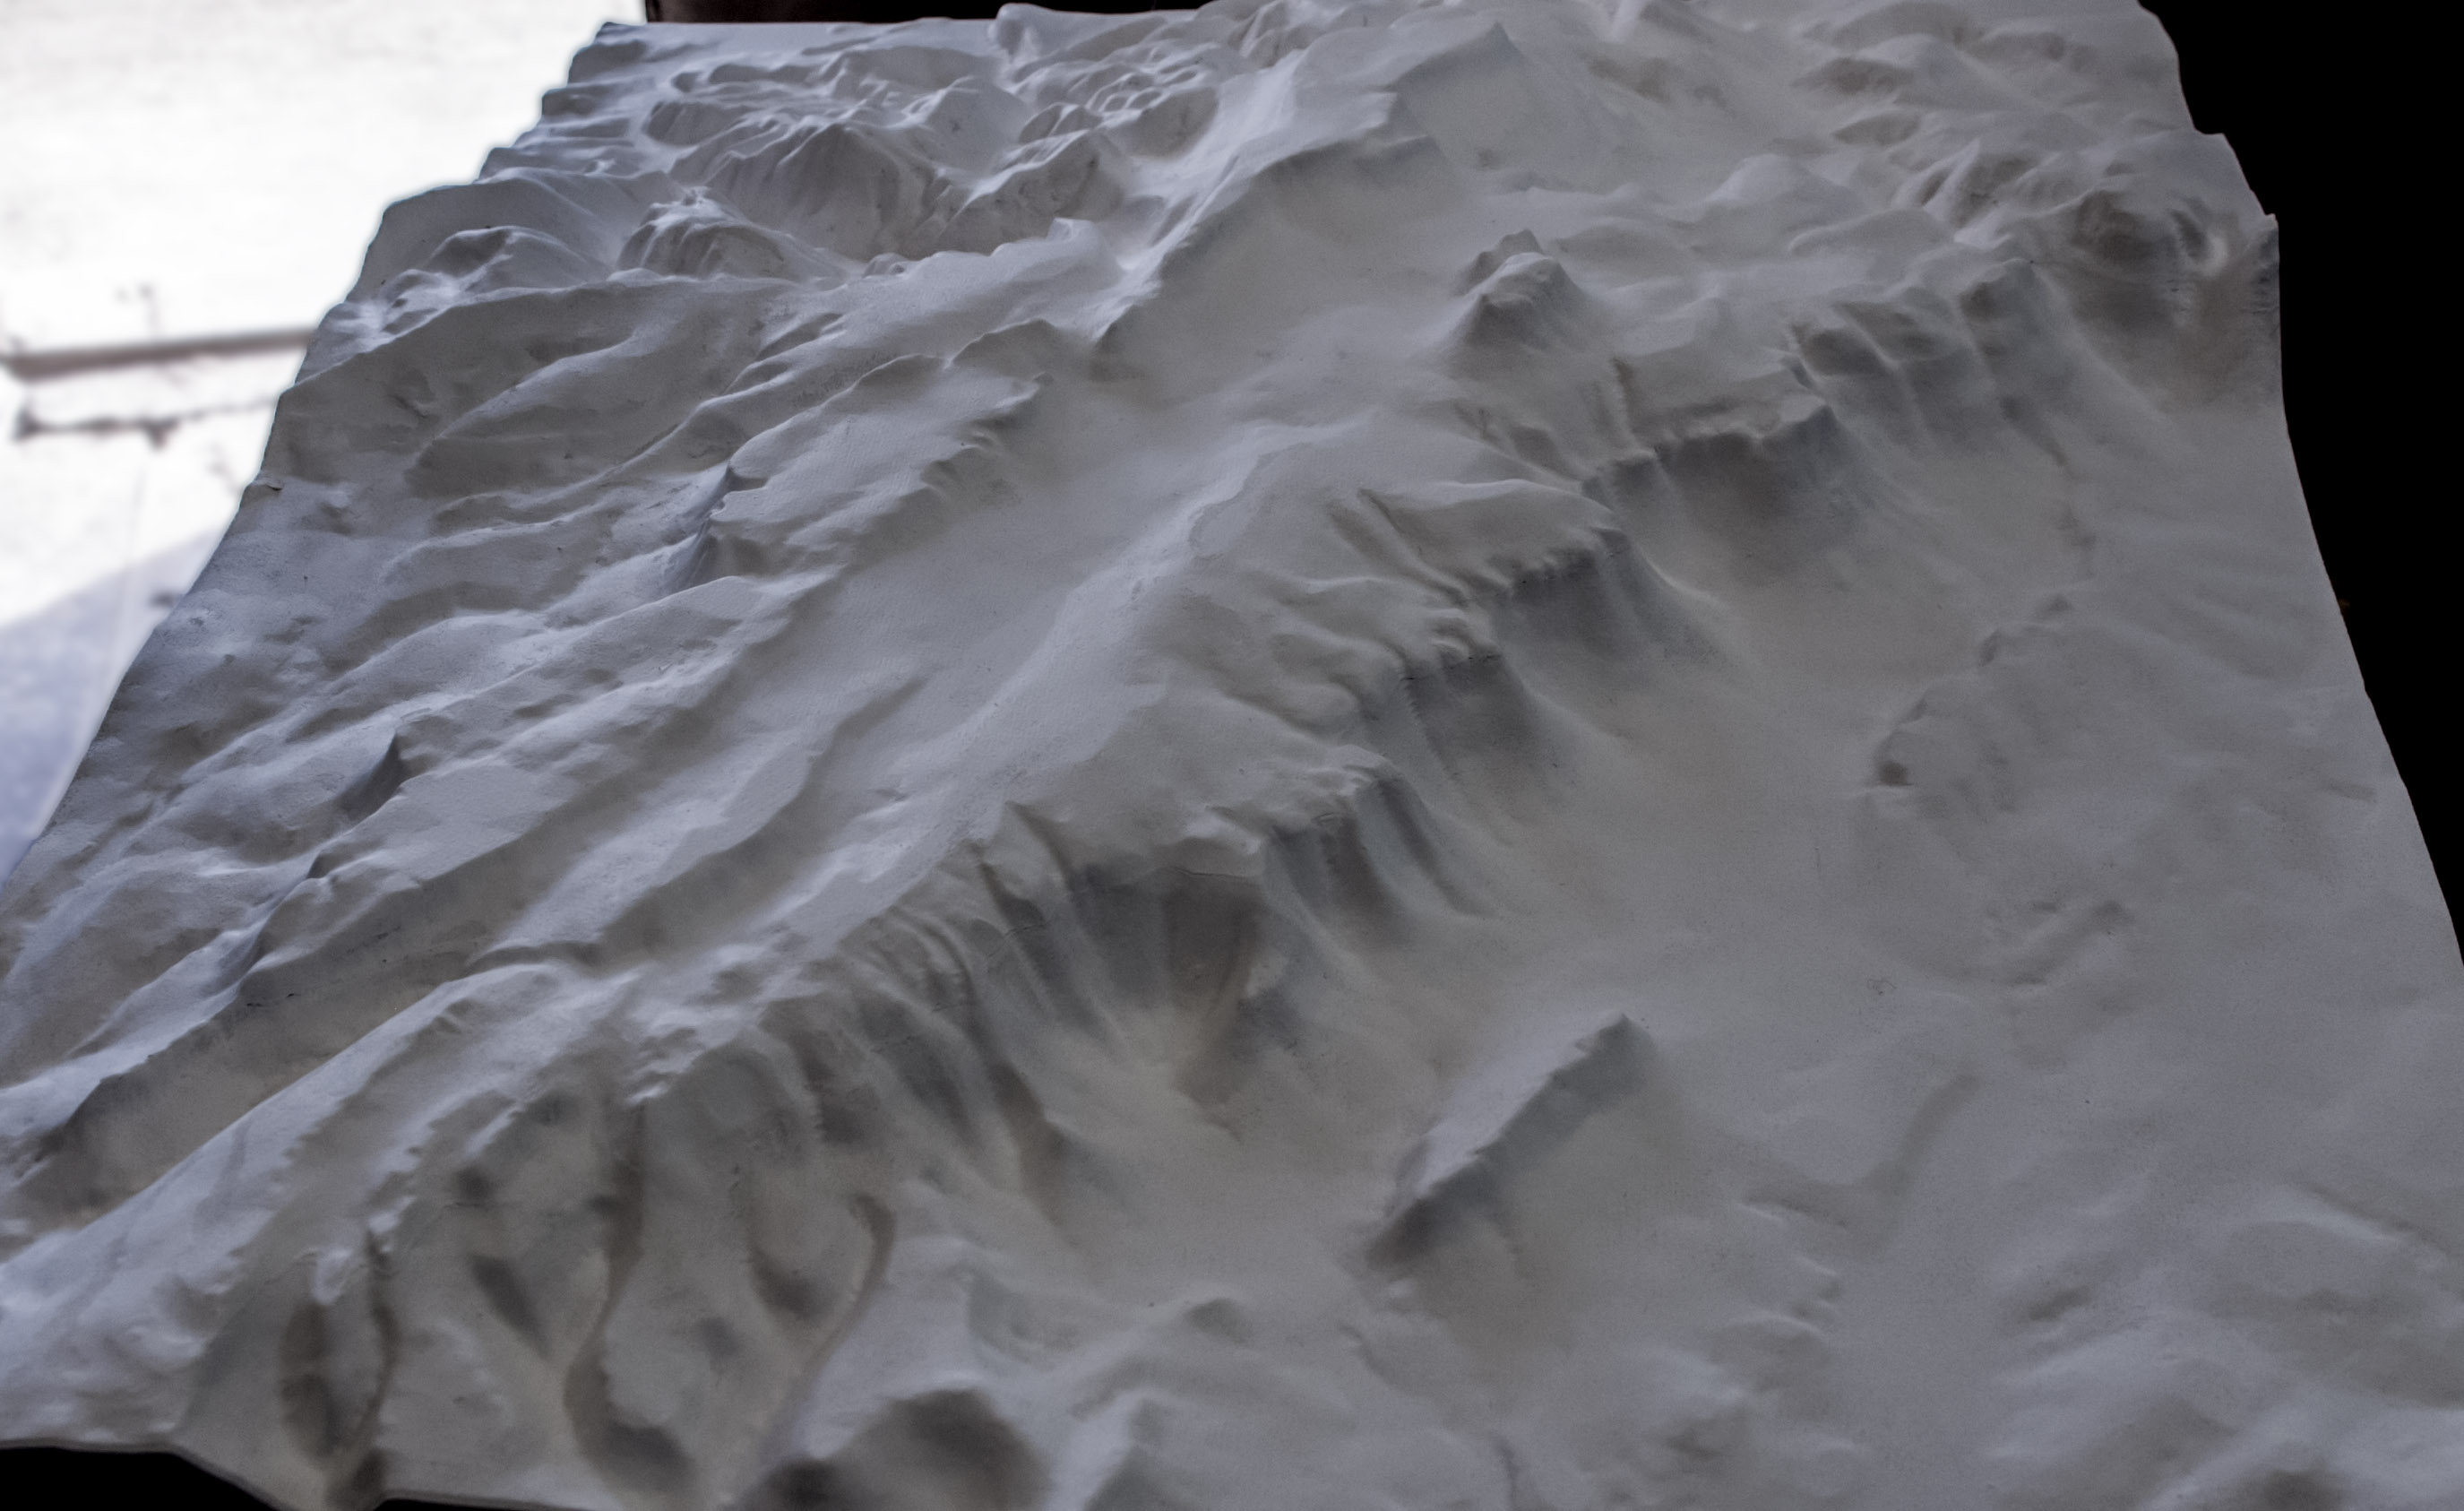 3D model of mountains